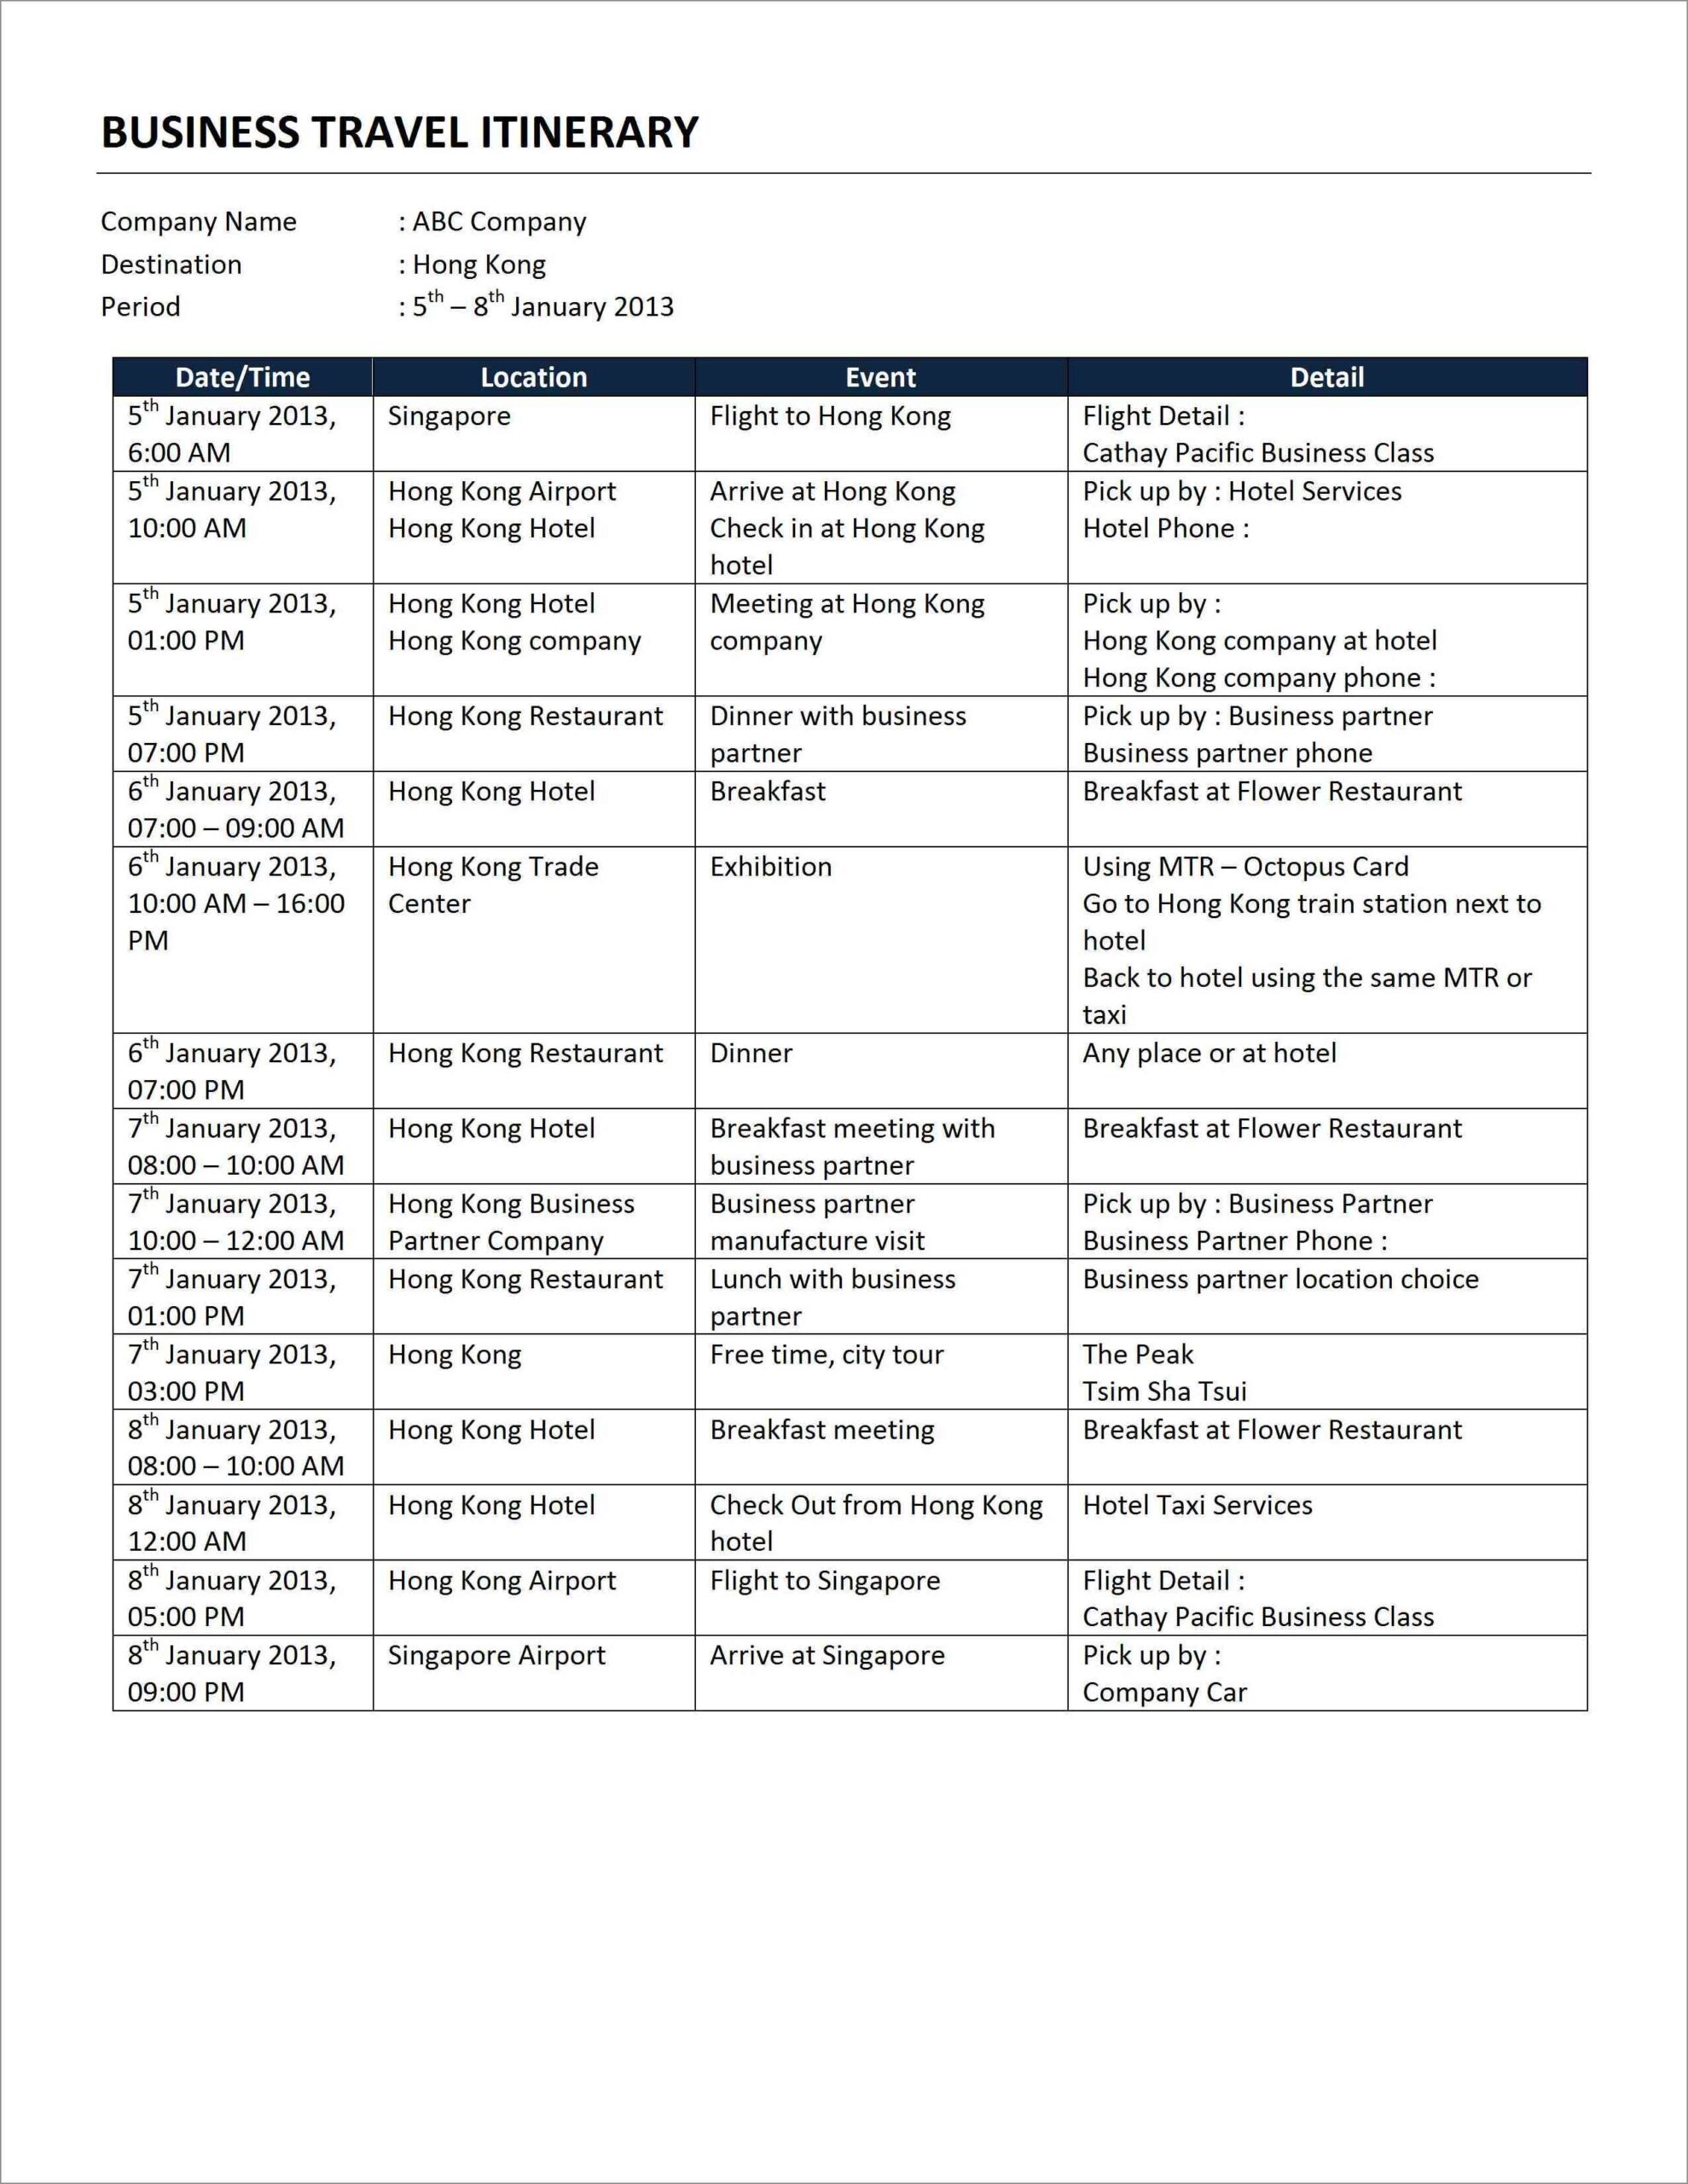 sample of business travel itinerary template